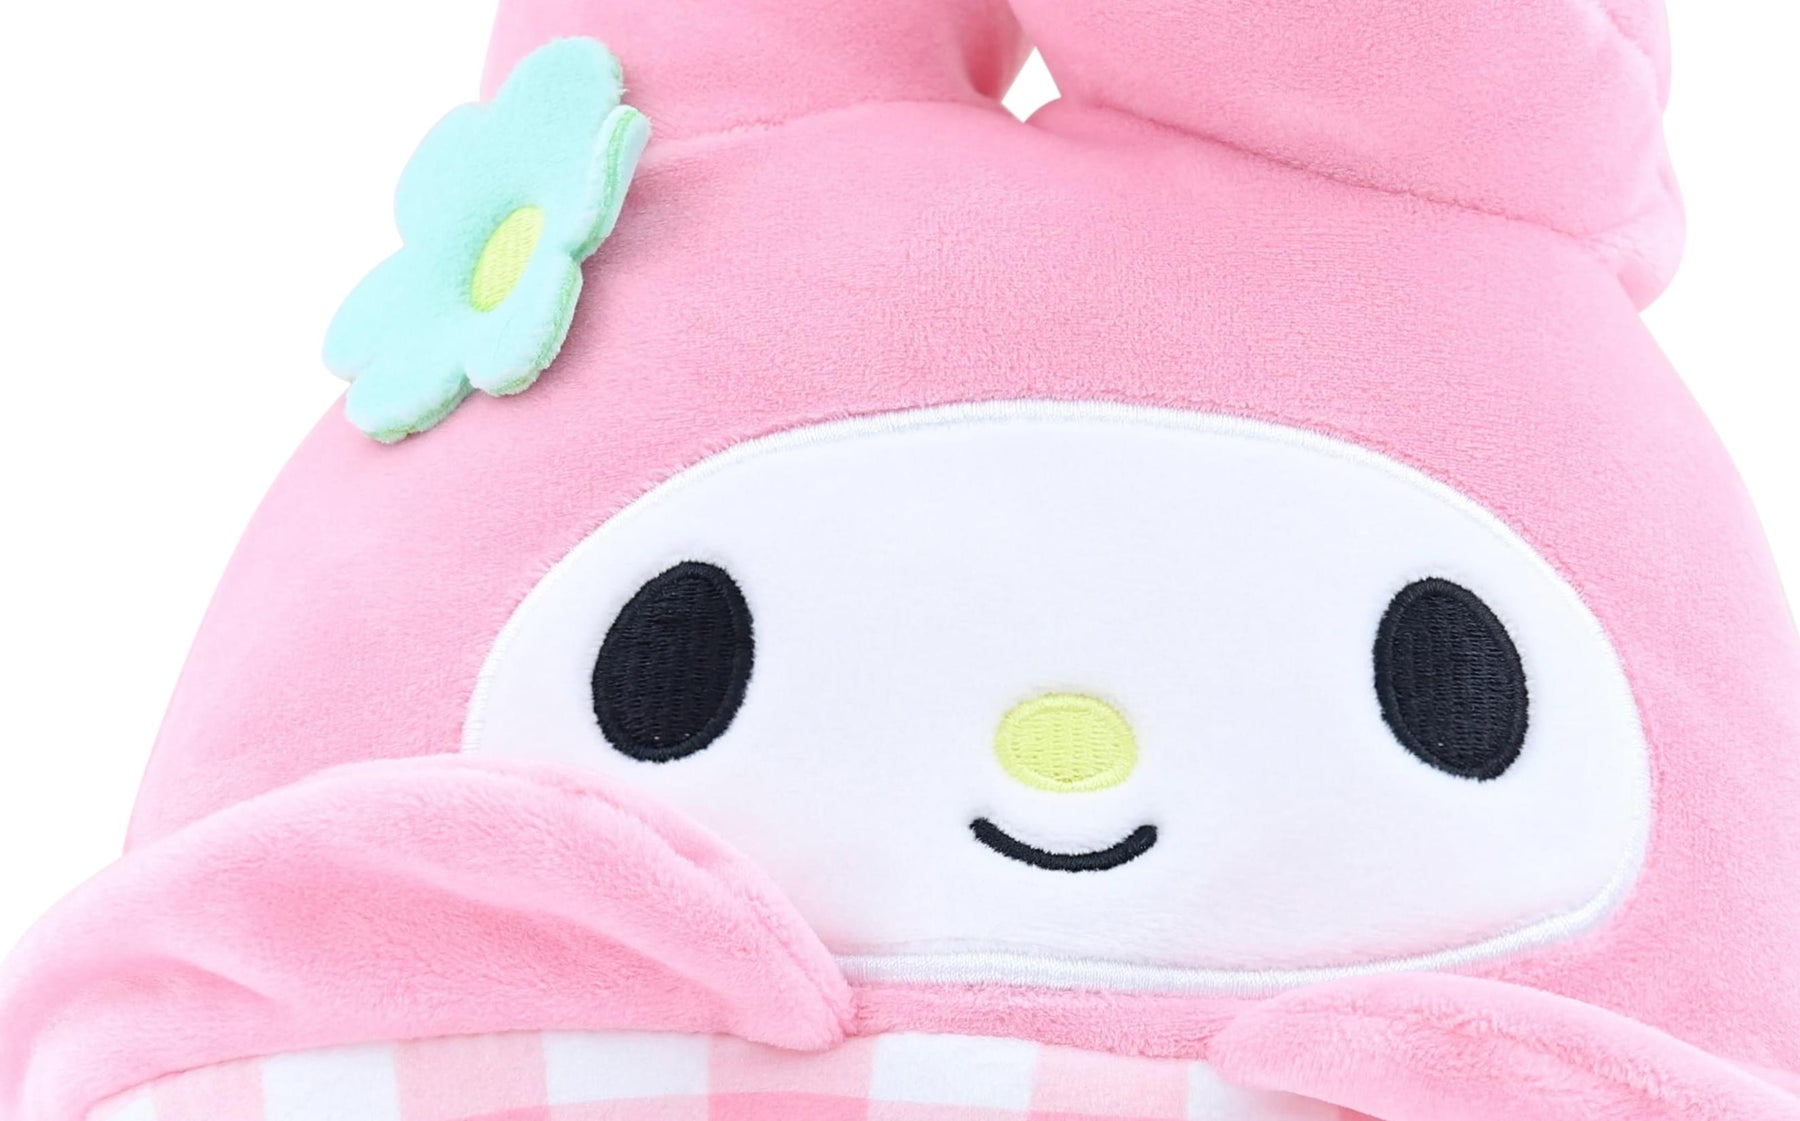 Hello Kitty Easter Squishmallow 8 Inch Plush | My Melody